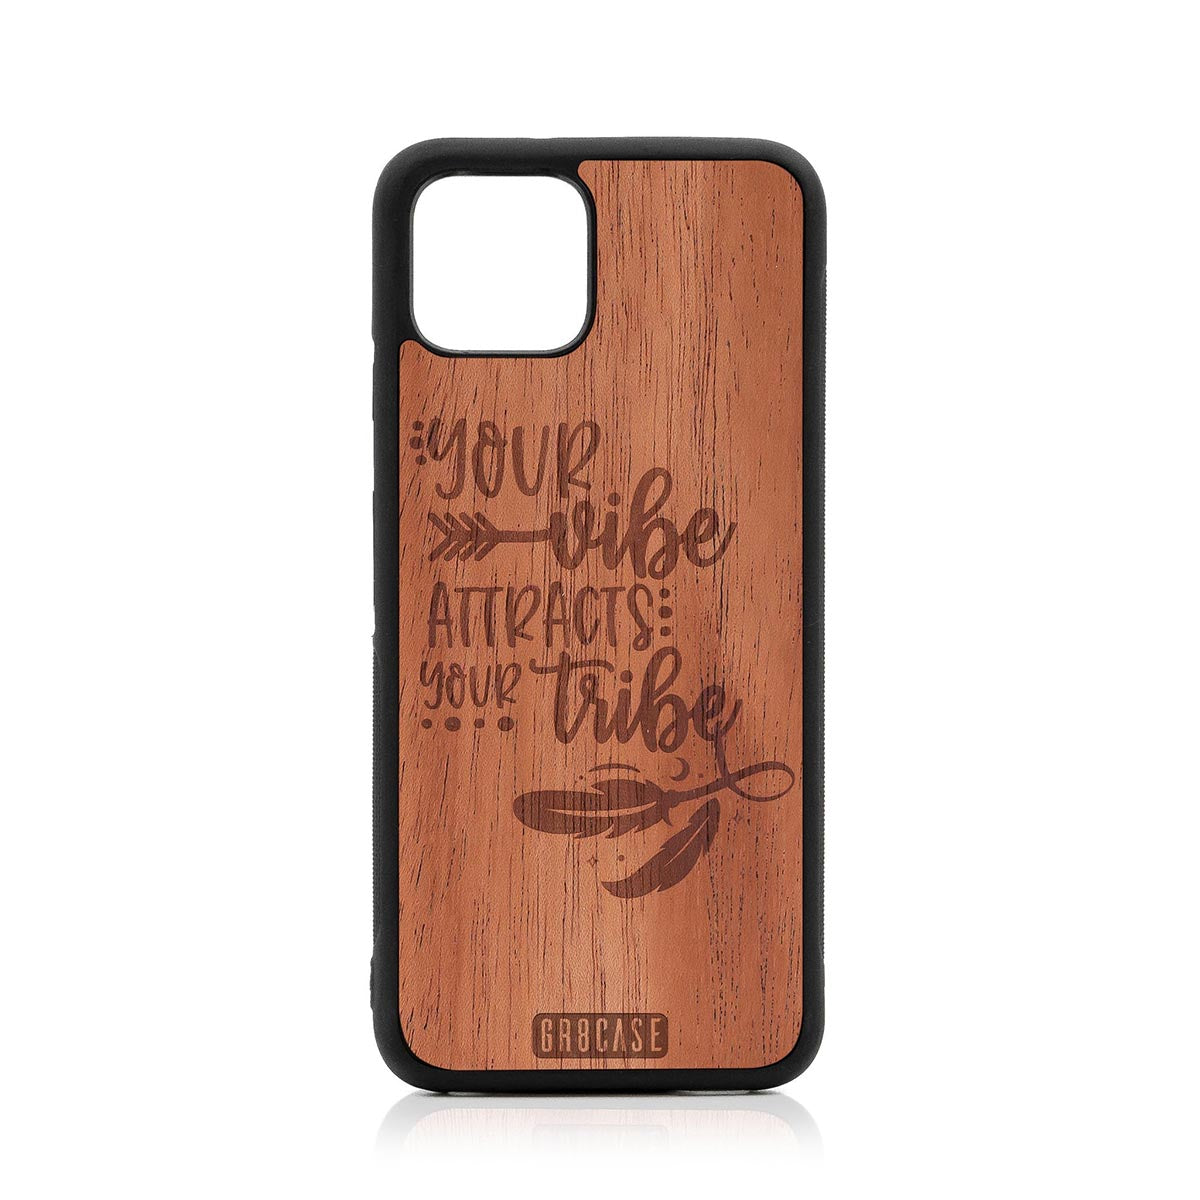 Your Vibe Attracts Your Tribe Design Wood Case Google Pixel 4